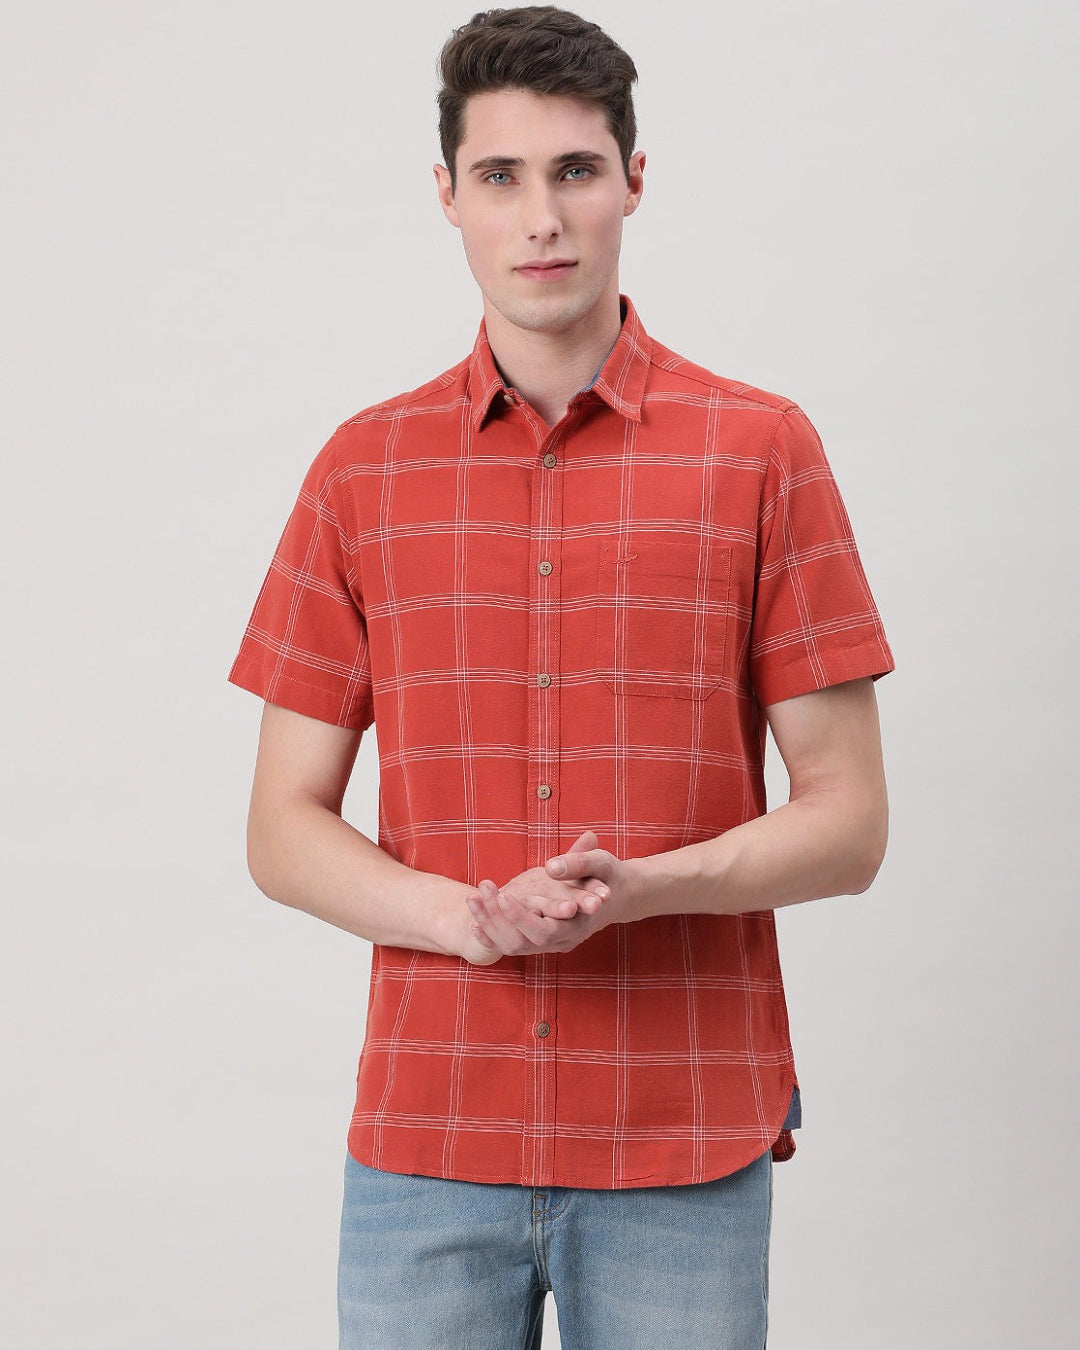 Casual Red Half Sleeve Comfort Fit Checks Shirt with Collar for Men